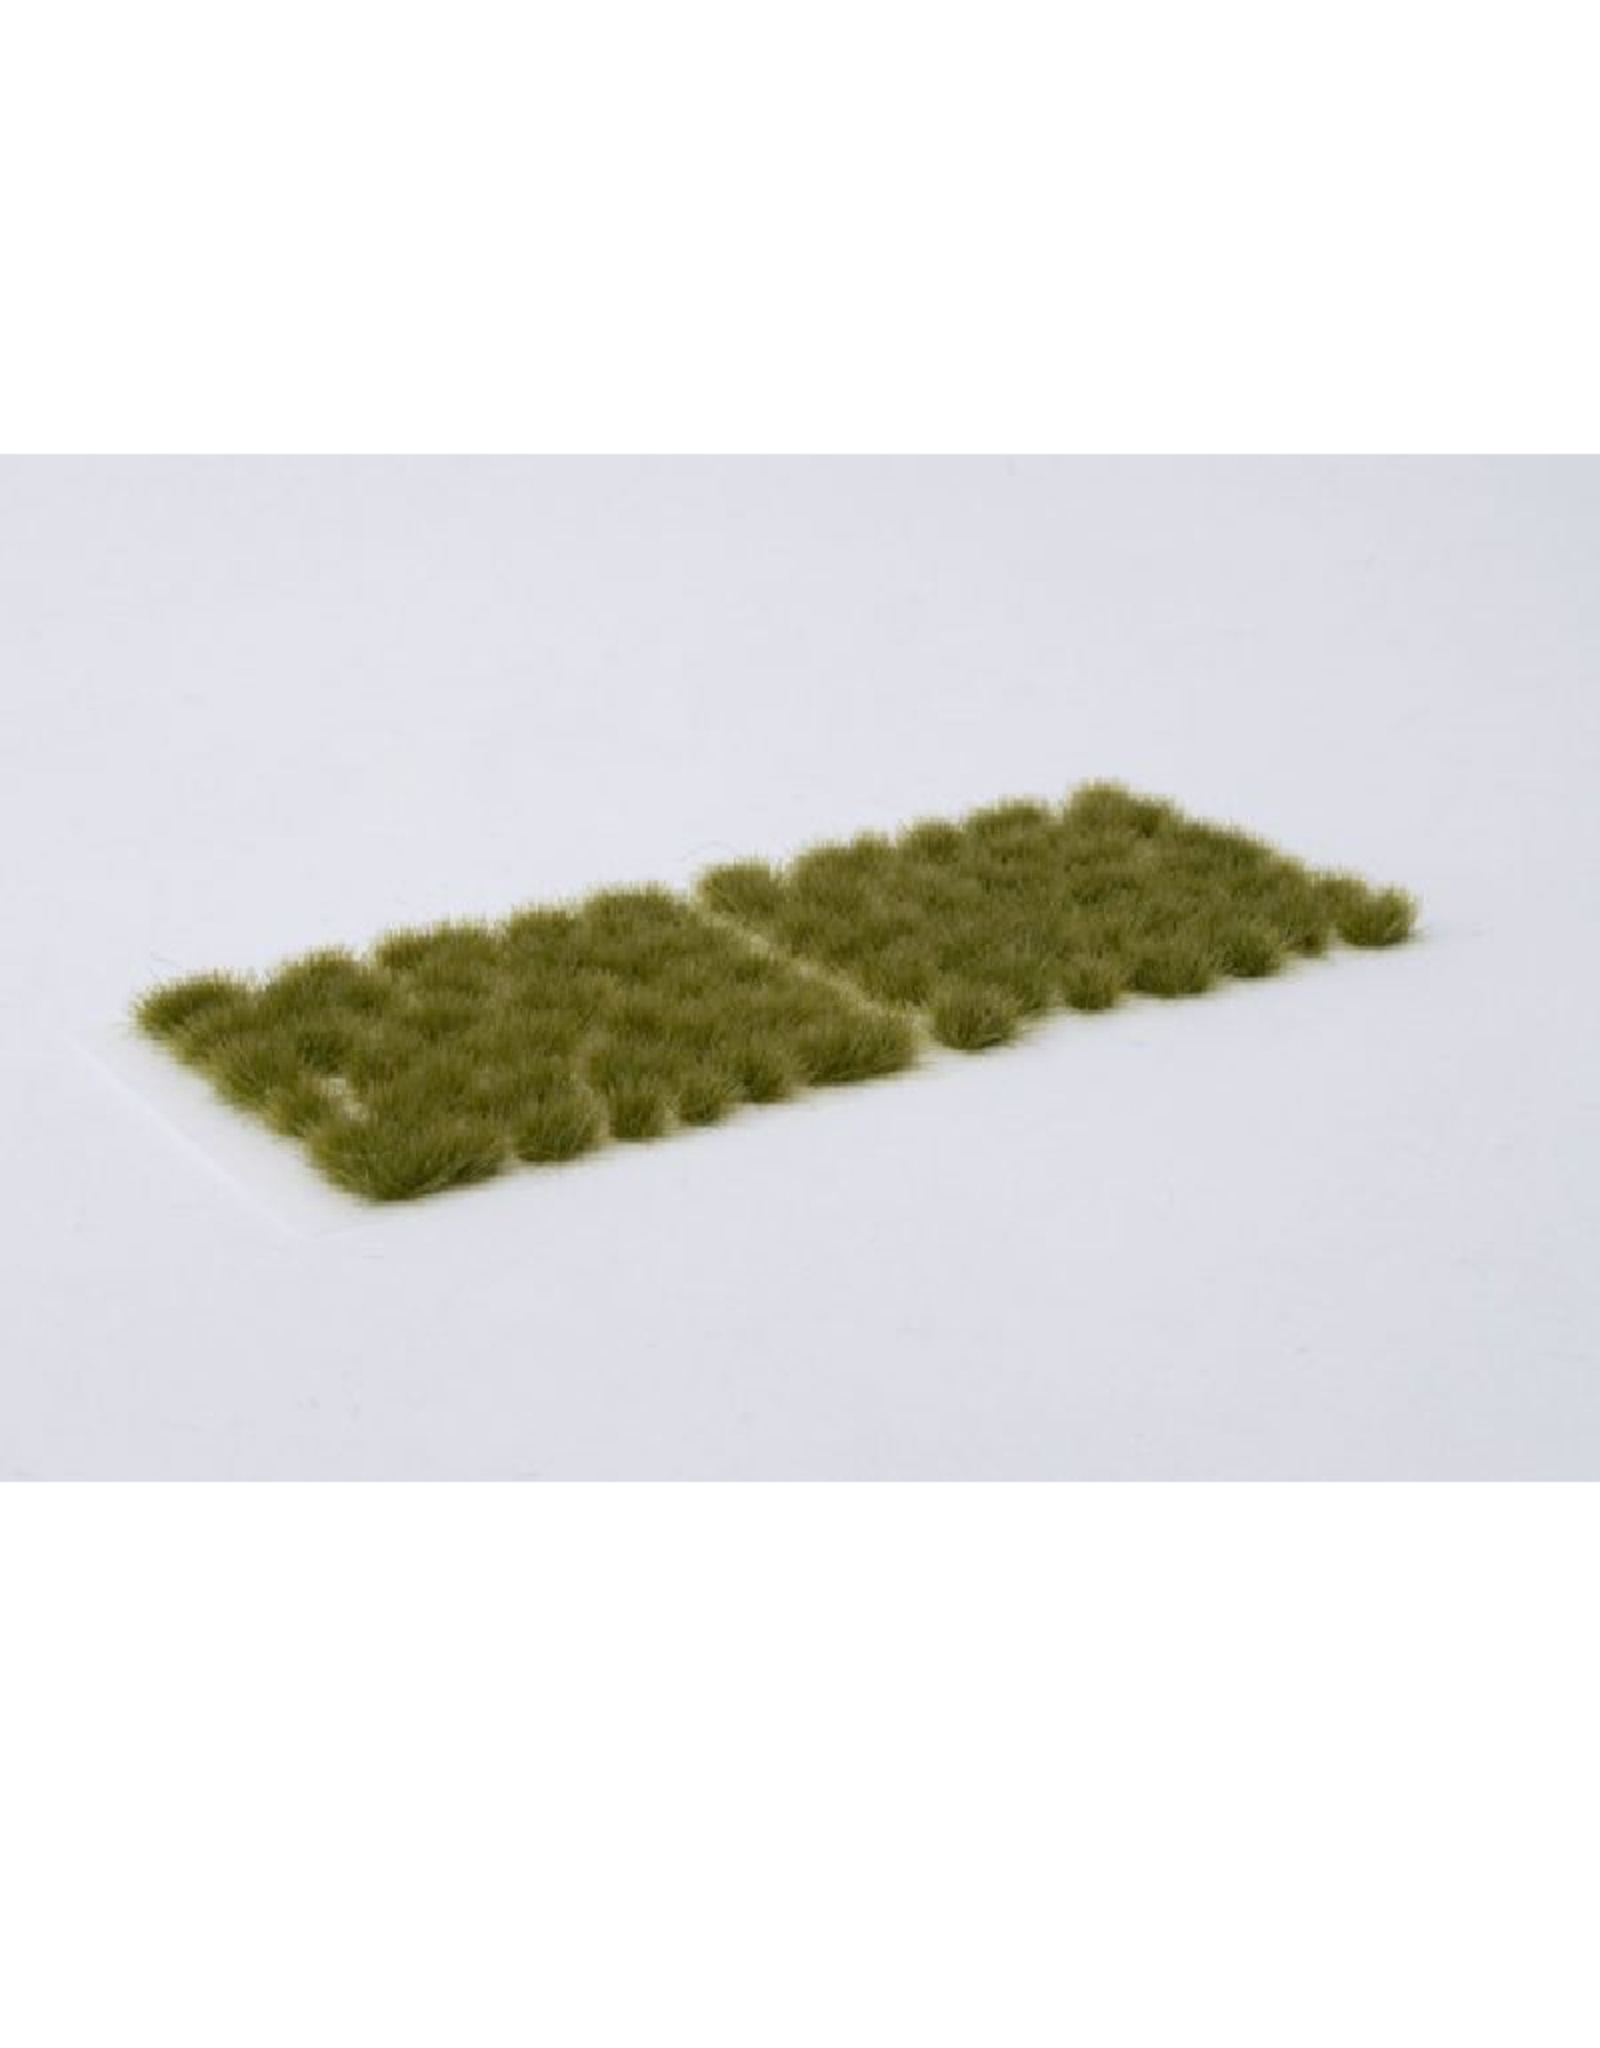 Gamers' Grass Dry Green tufts (6mm)